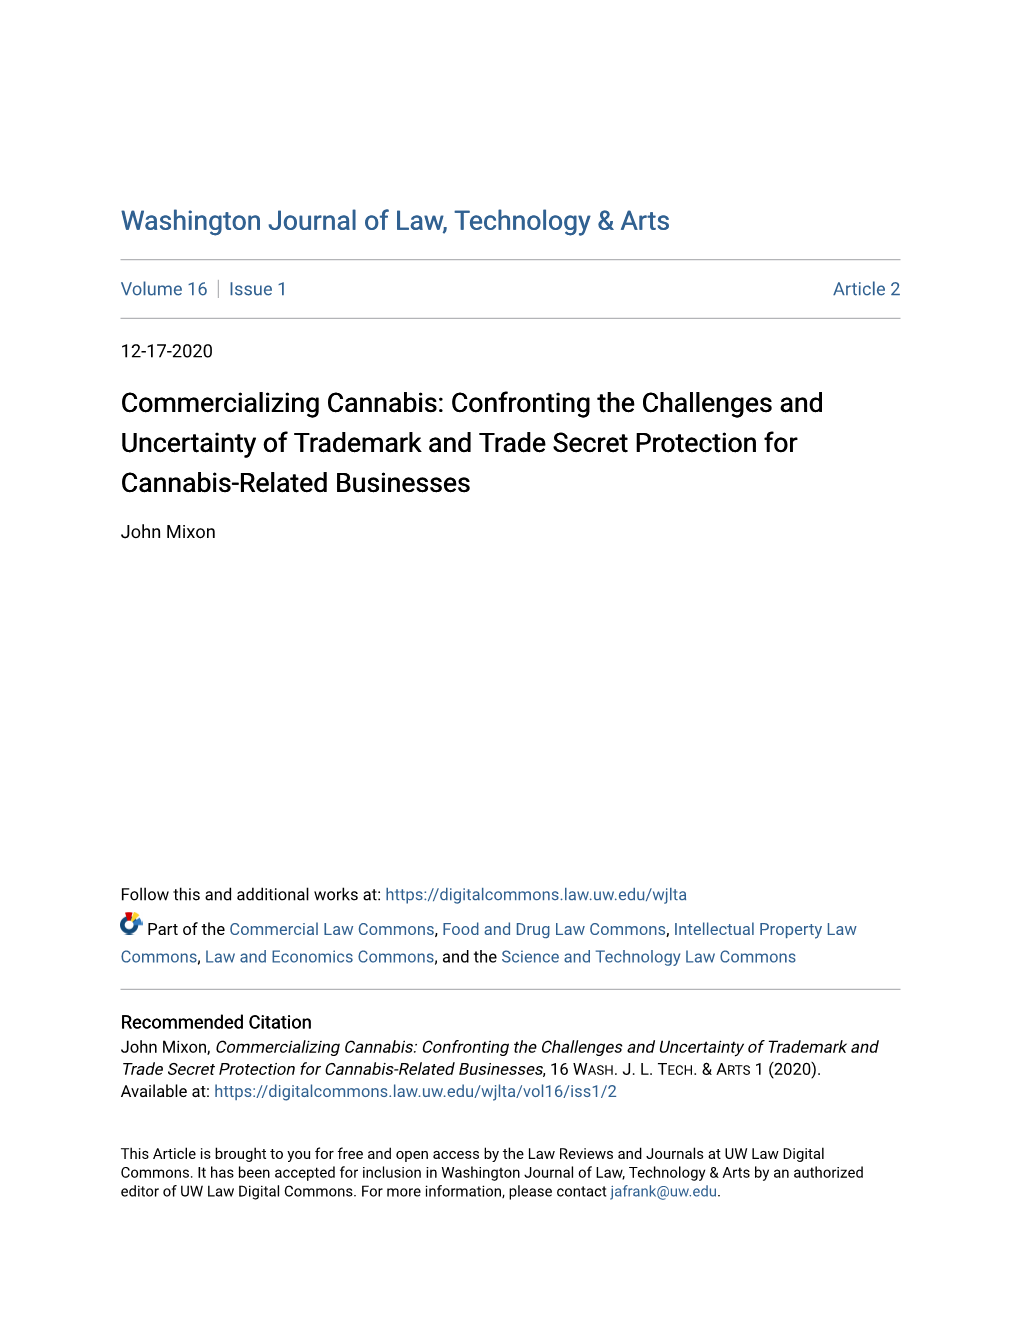 Commercializing Cannabis: Confronting the Challenges and Uncertainty of Trademark and Trade Secret Protection for Cannabis-Related Businesses